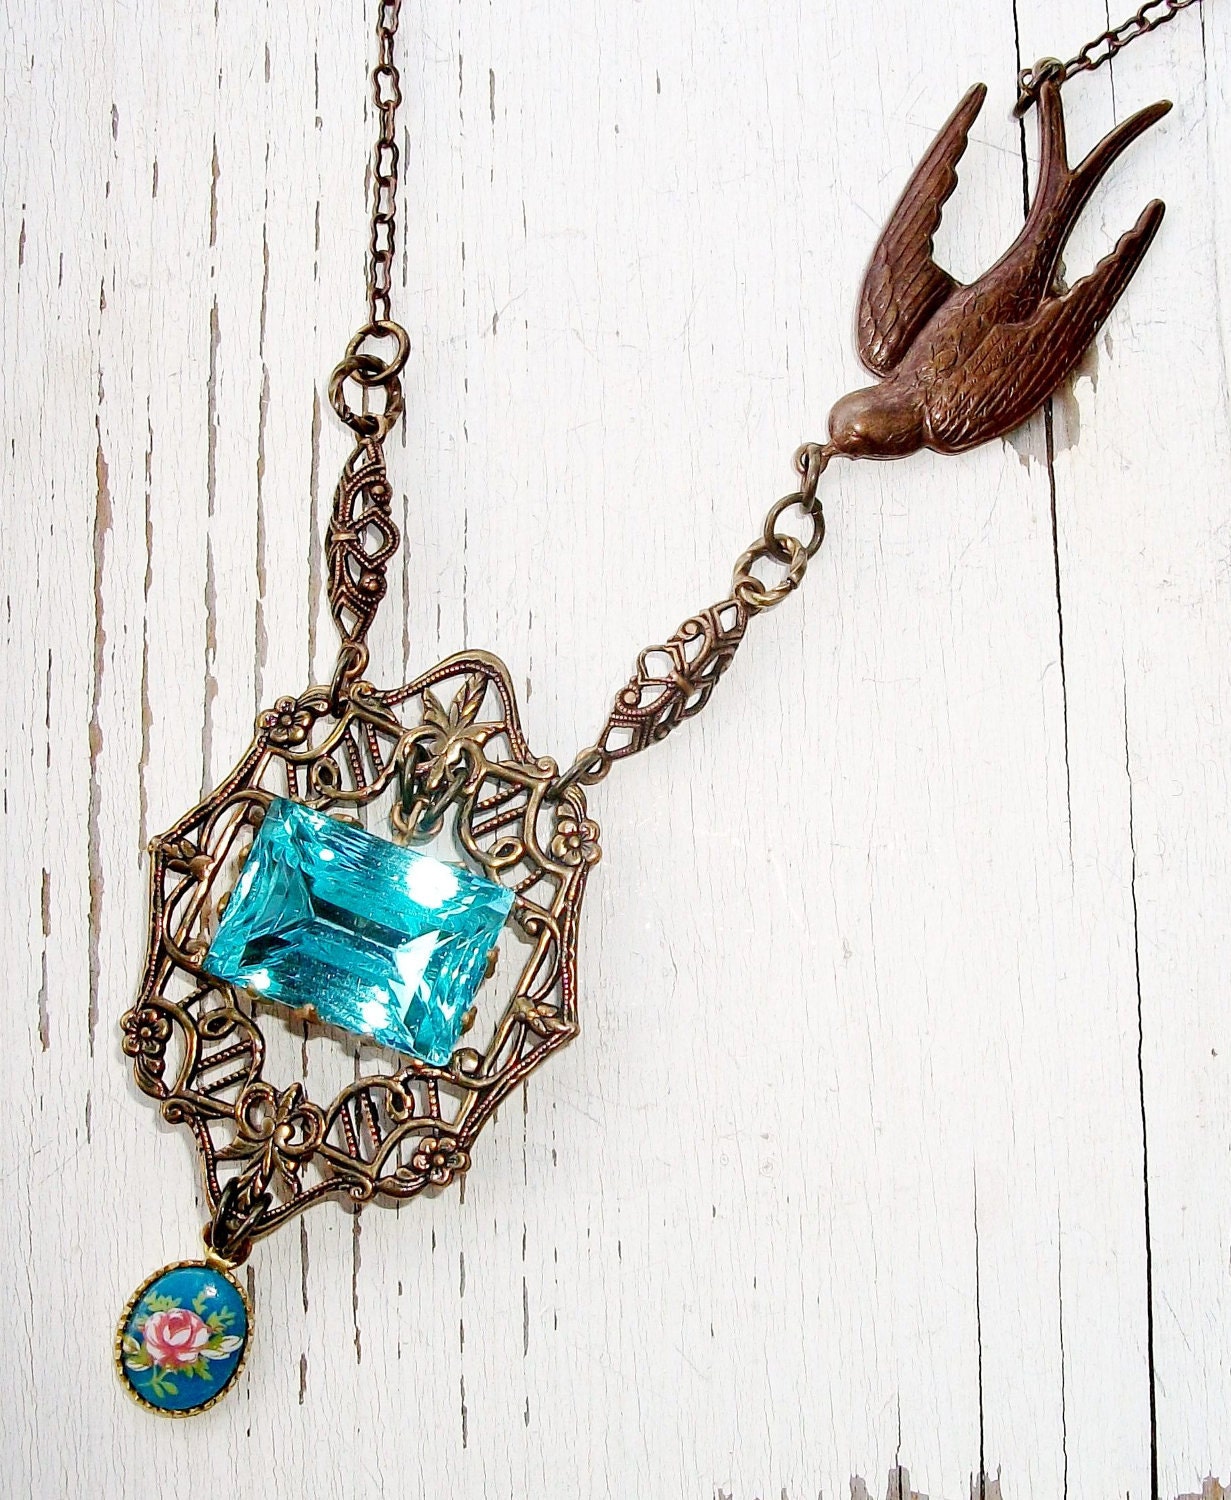 Large VINTAGE Blue Glass Rhinestone NECKLACE with  Aged Brass - "Fly Away Home" - Vintage Components, One-of-a-Kind